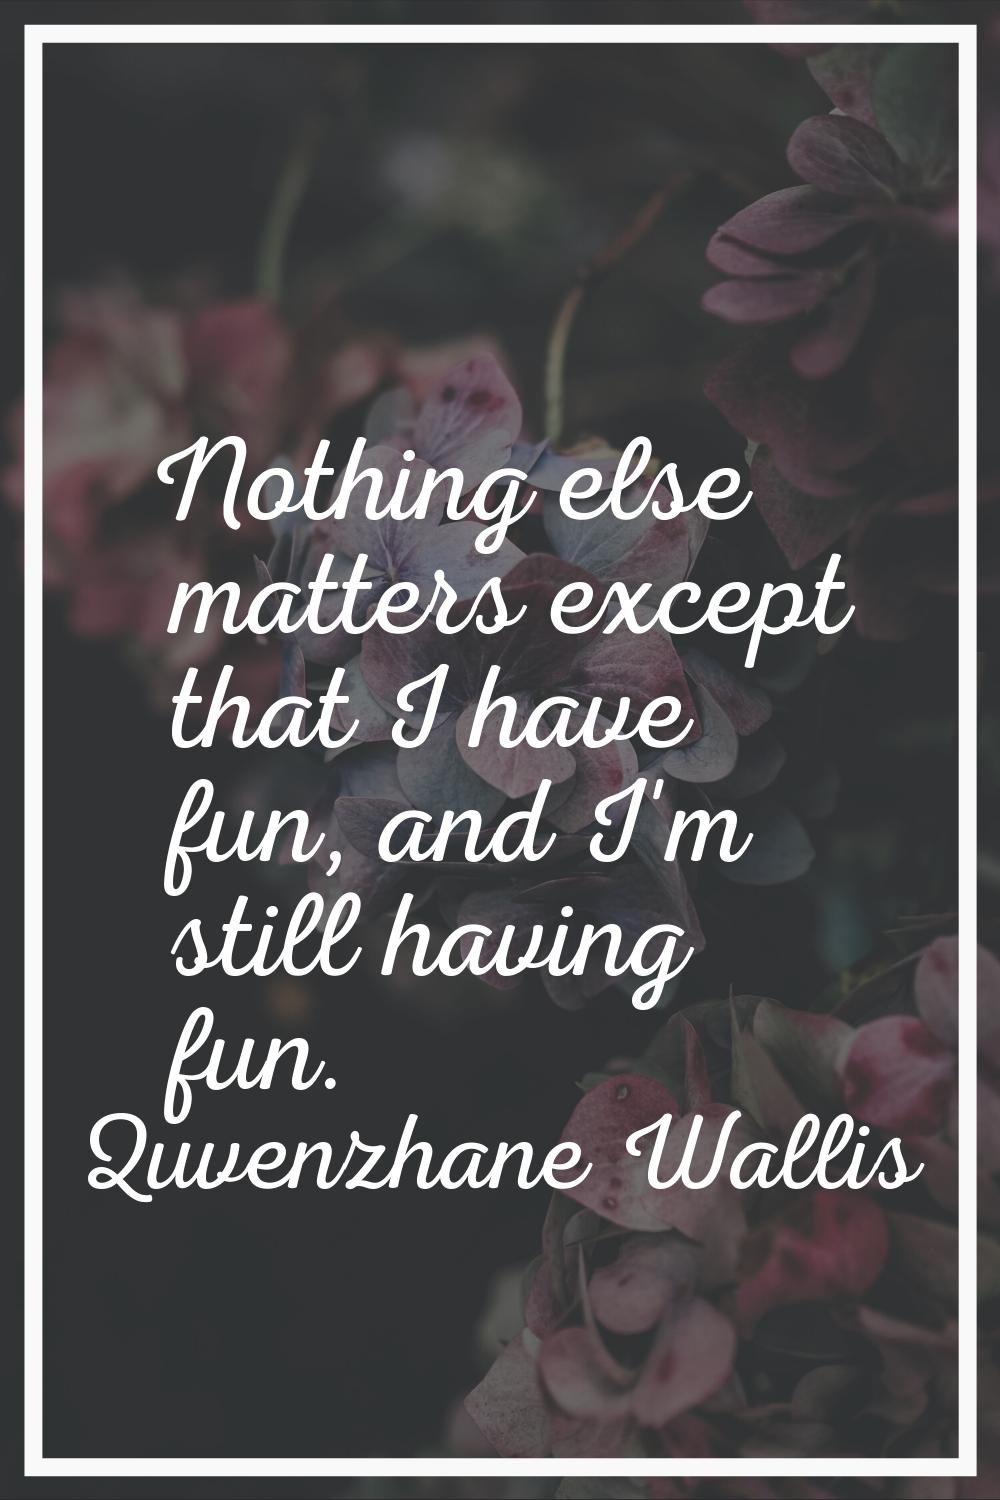 Nothing else matters except that I have fun, and I'm still having fun.